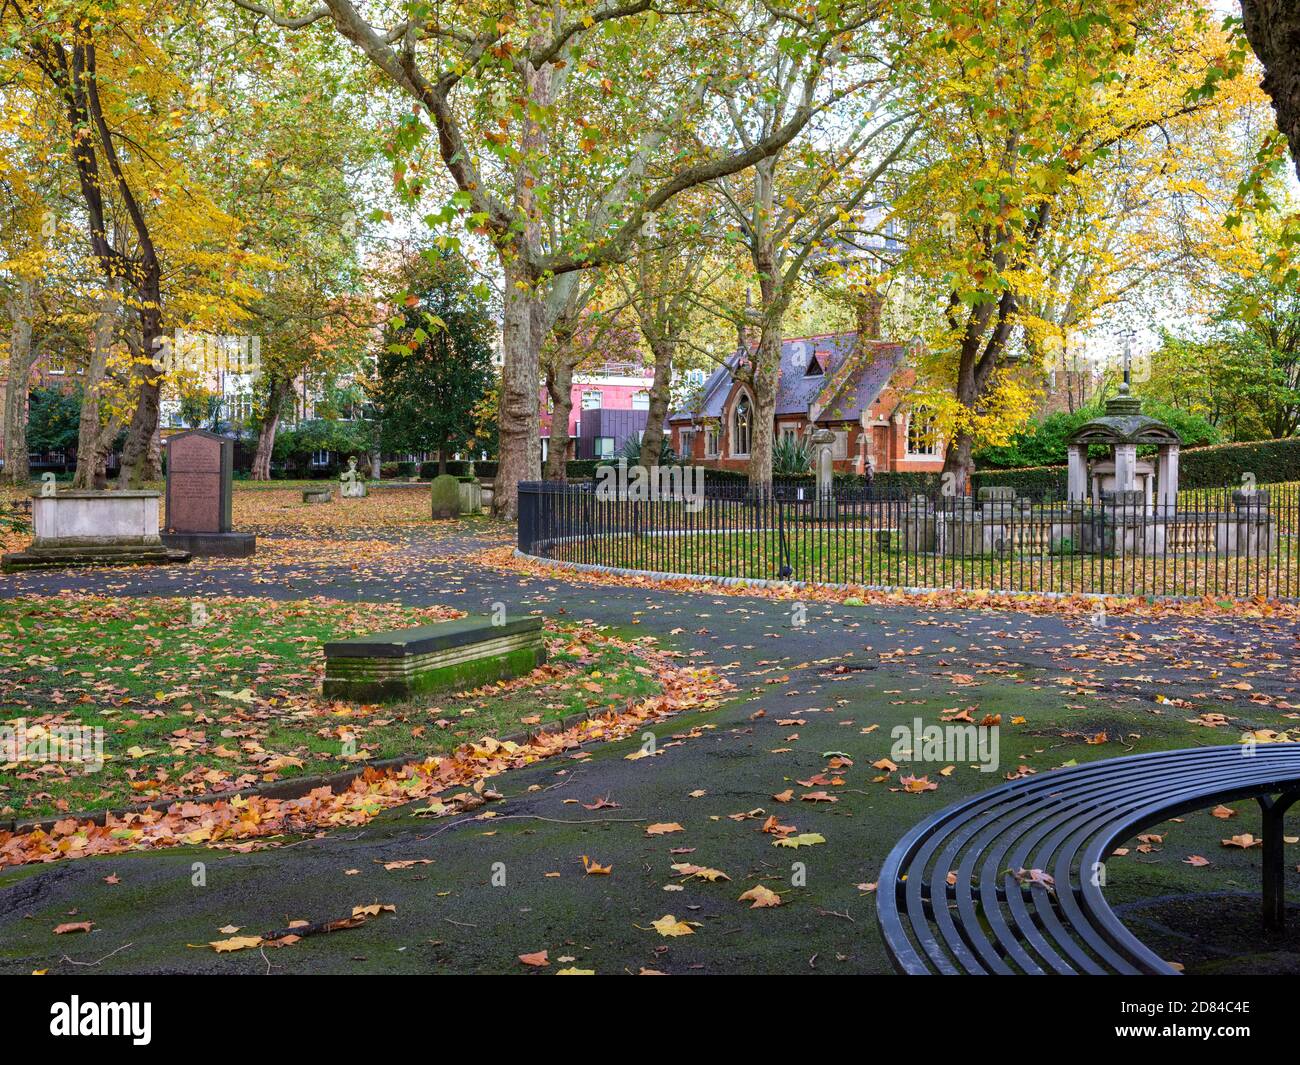 London in Autumn: enjoy the beauty of autumn colours, exercise and fresh air at St Pancras Old Church graveyard Stock Photo